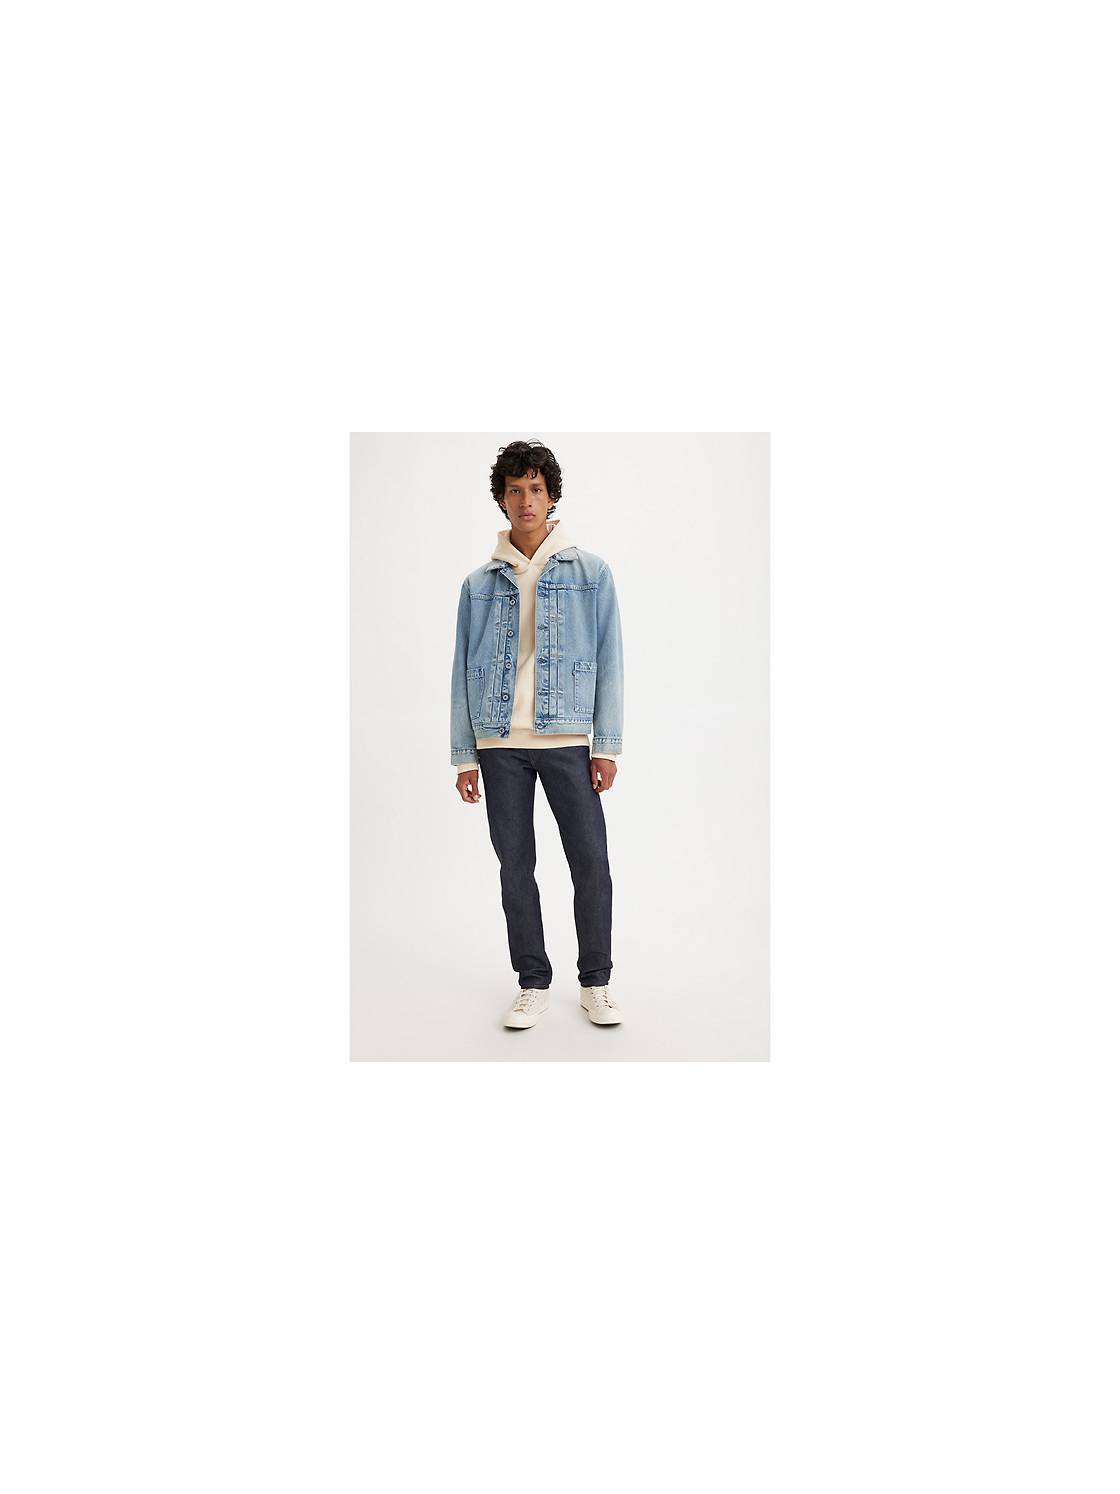 Men's Made & Crafted® Clothing | Levi's® US